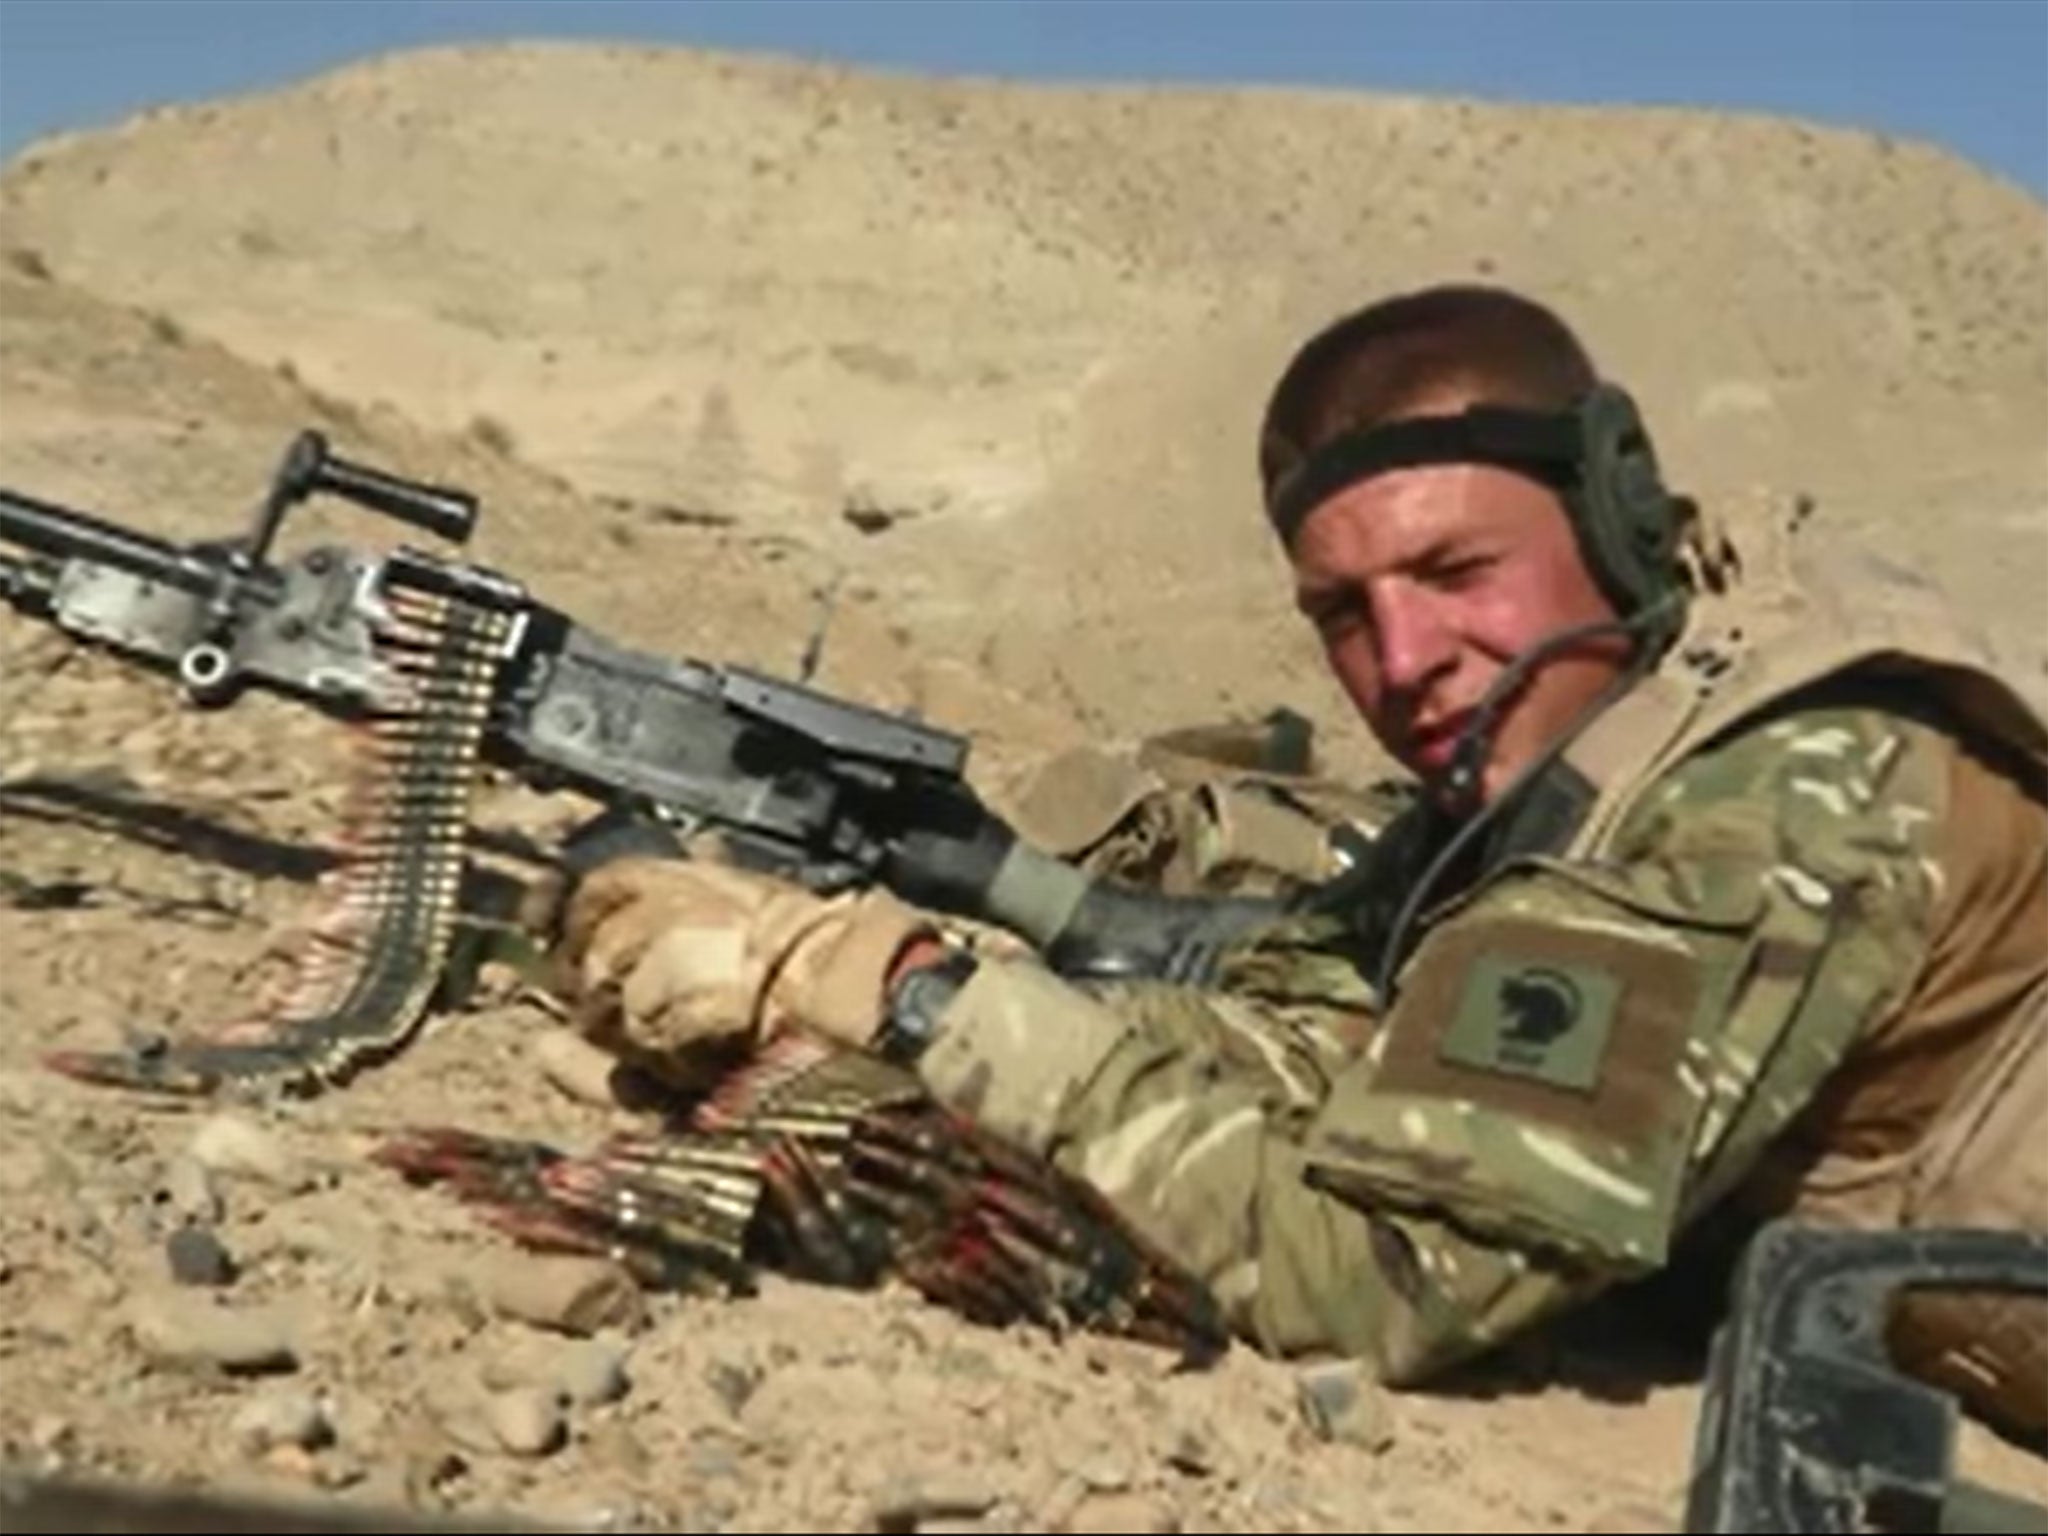 Andy Garthwaite, a rocket-propelled grenade took off his right arm during an intense firefight in Afghanistan